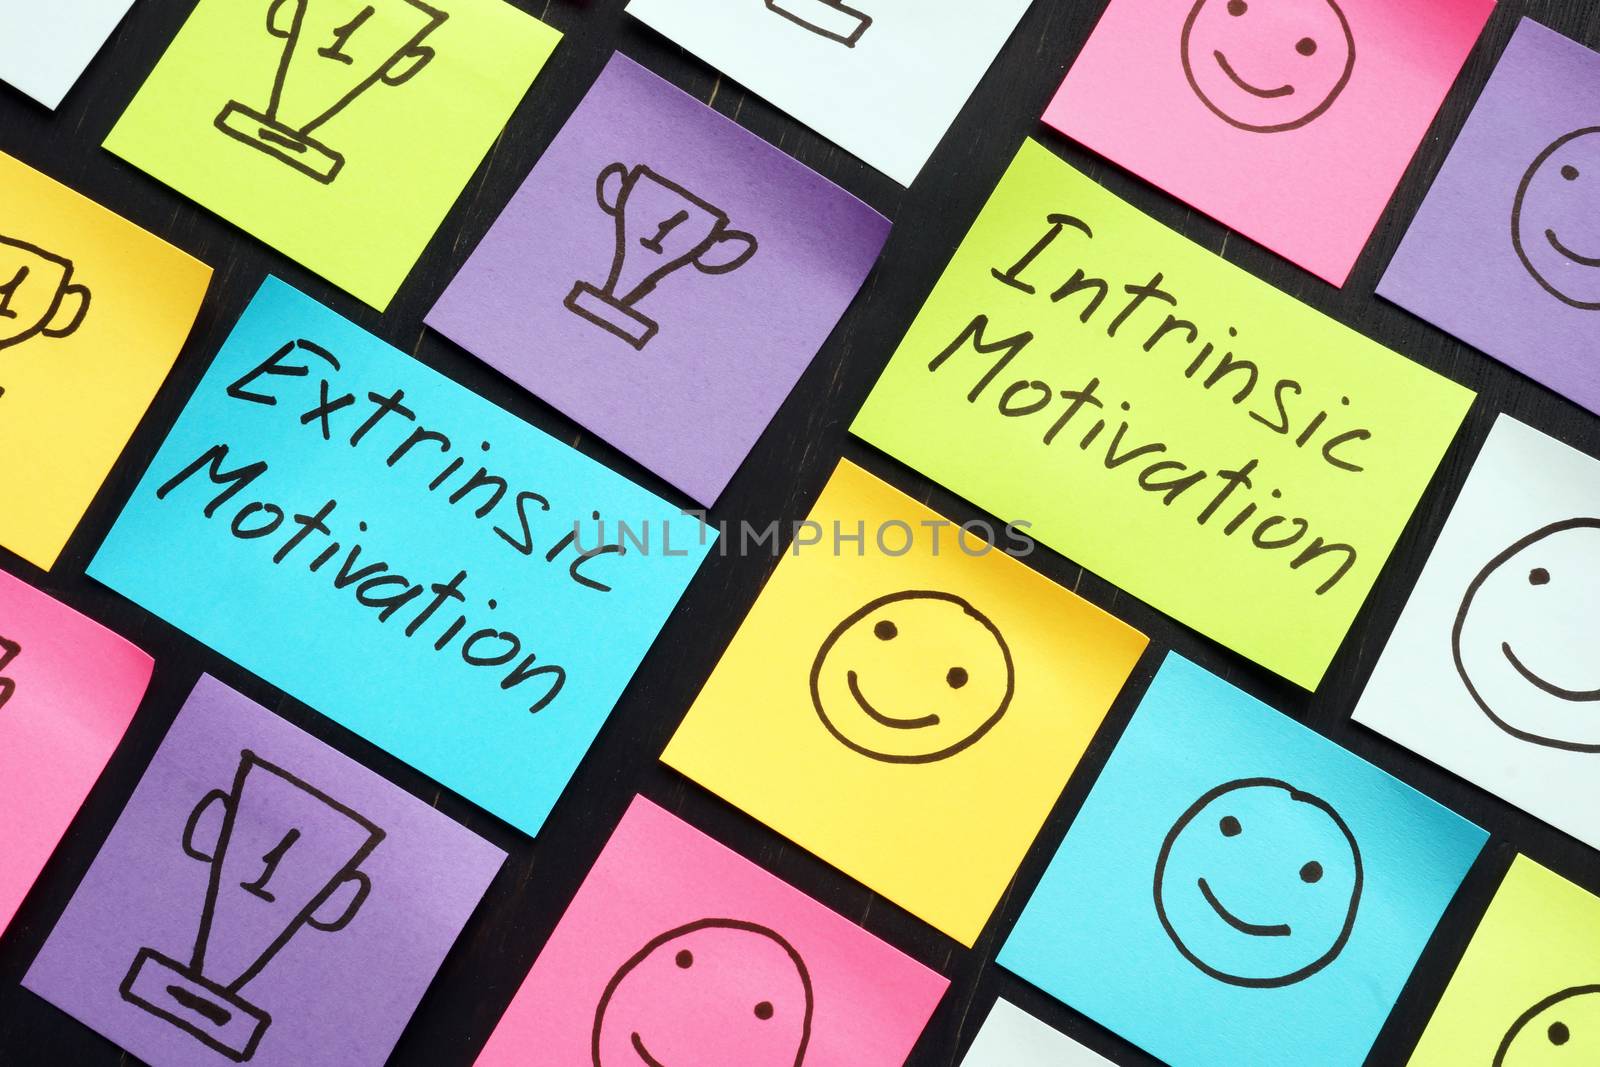 Extrinsic and intrinsic motivation signs and small memo sticks.